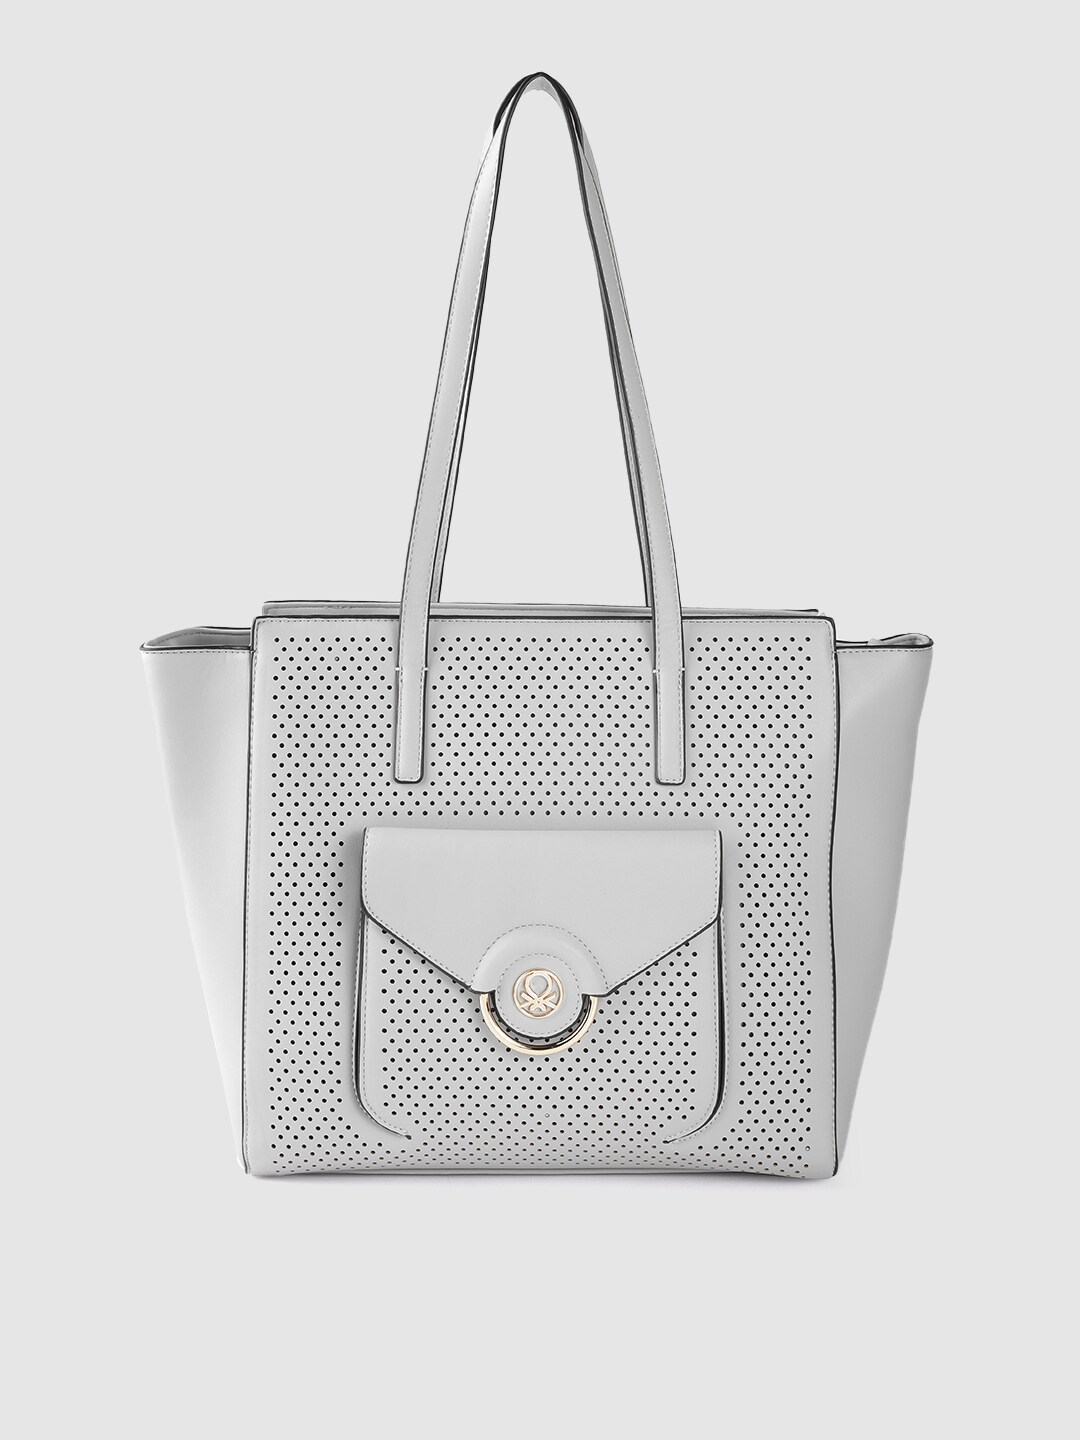 United Colors of Benetton Grey Laser Cut Swagger Shoulder Bag Price in India